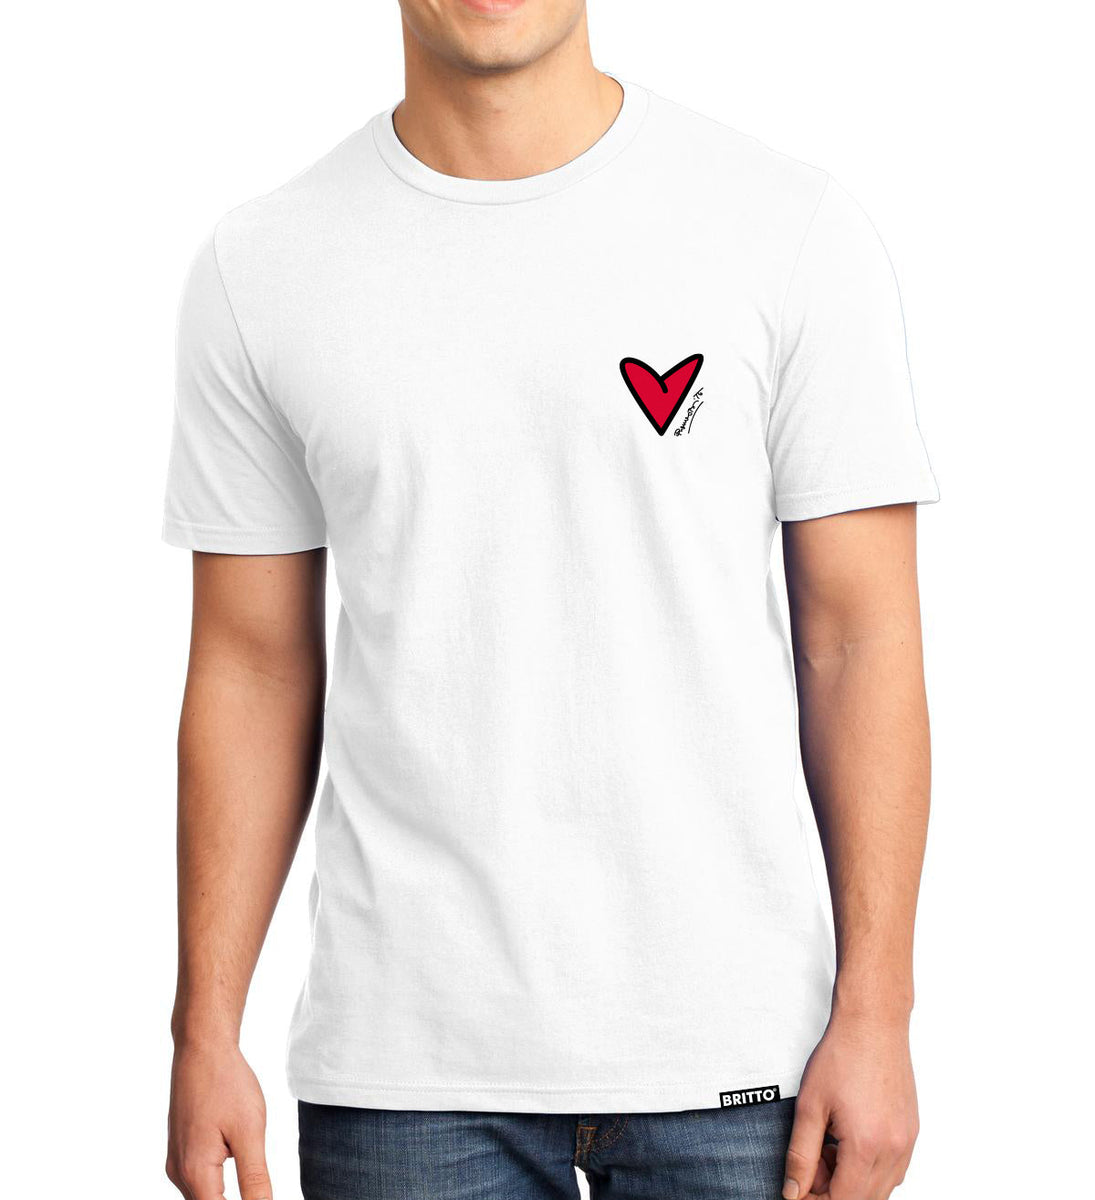 Limited Edition Mens White T-shirt